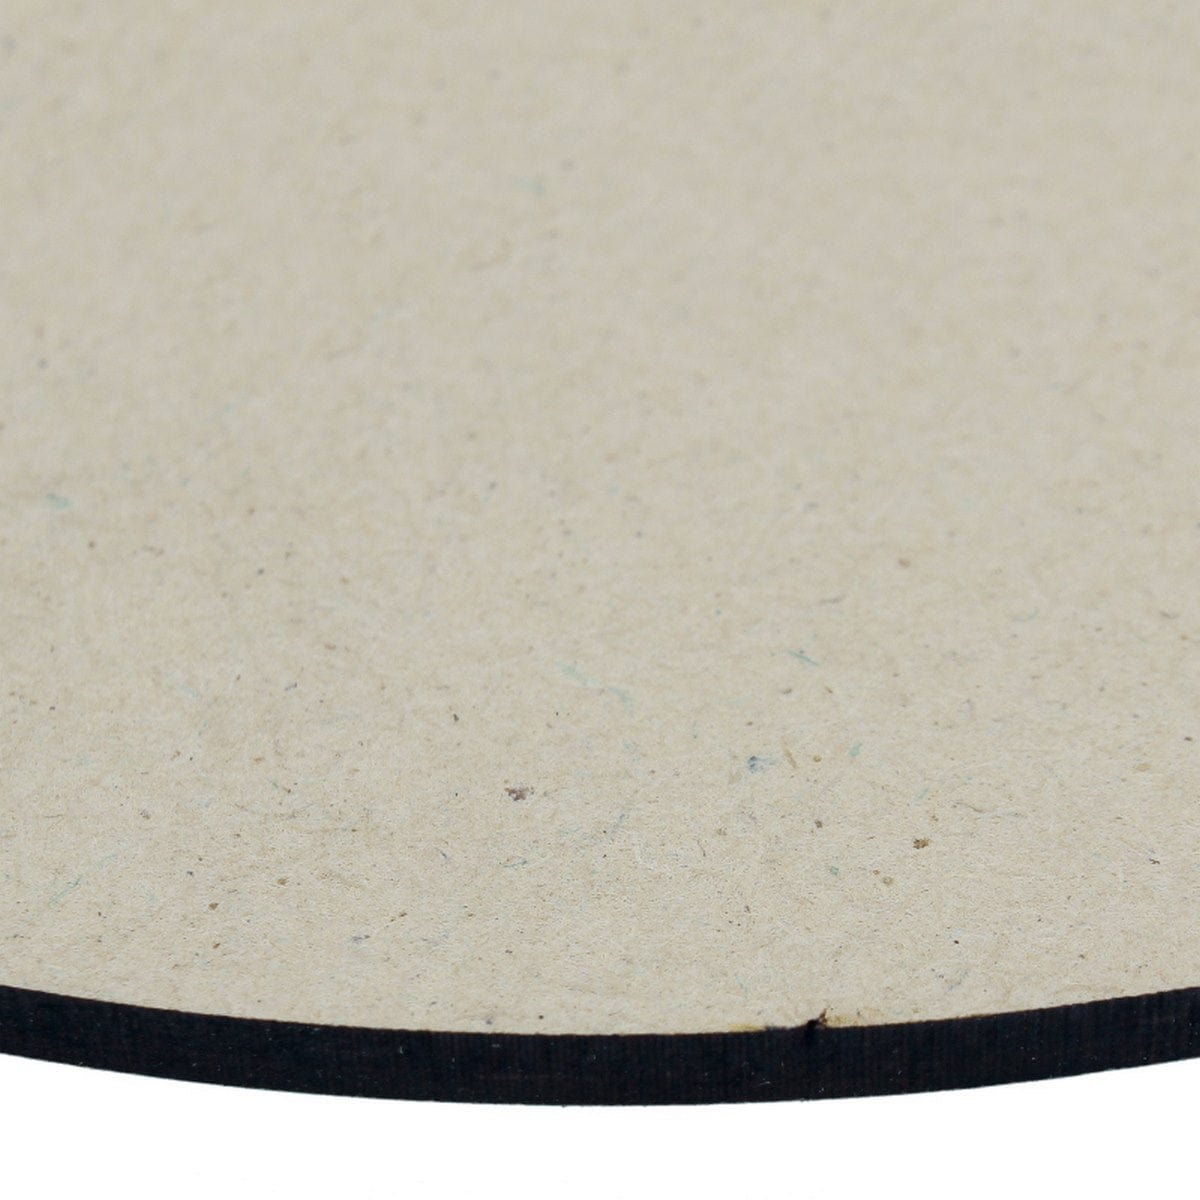 jags-mumbai MDF MDF Plate Round 6 Inch [4mm] (Contain 1 Unit) - Durable and Versatile